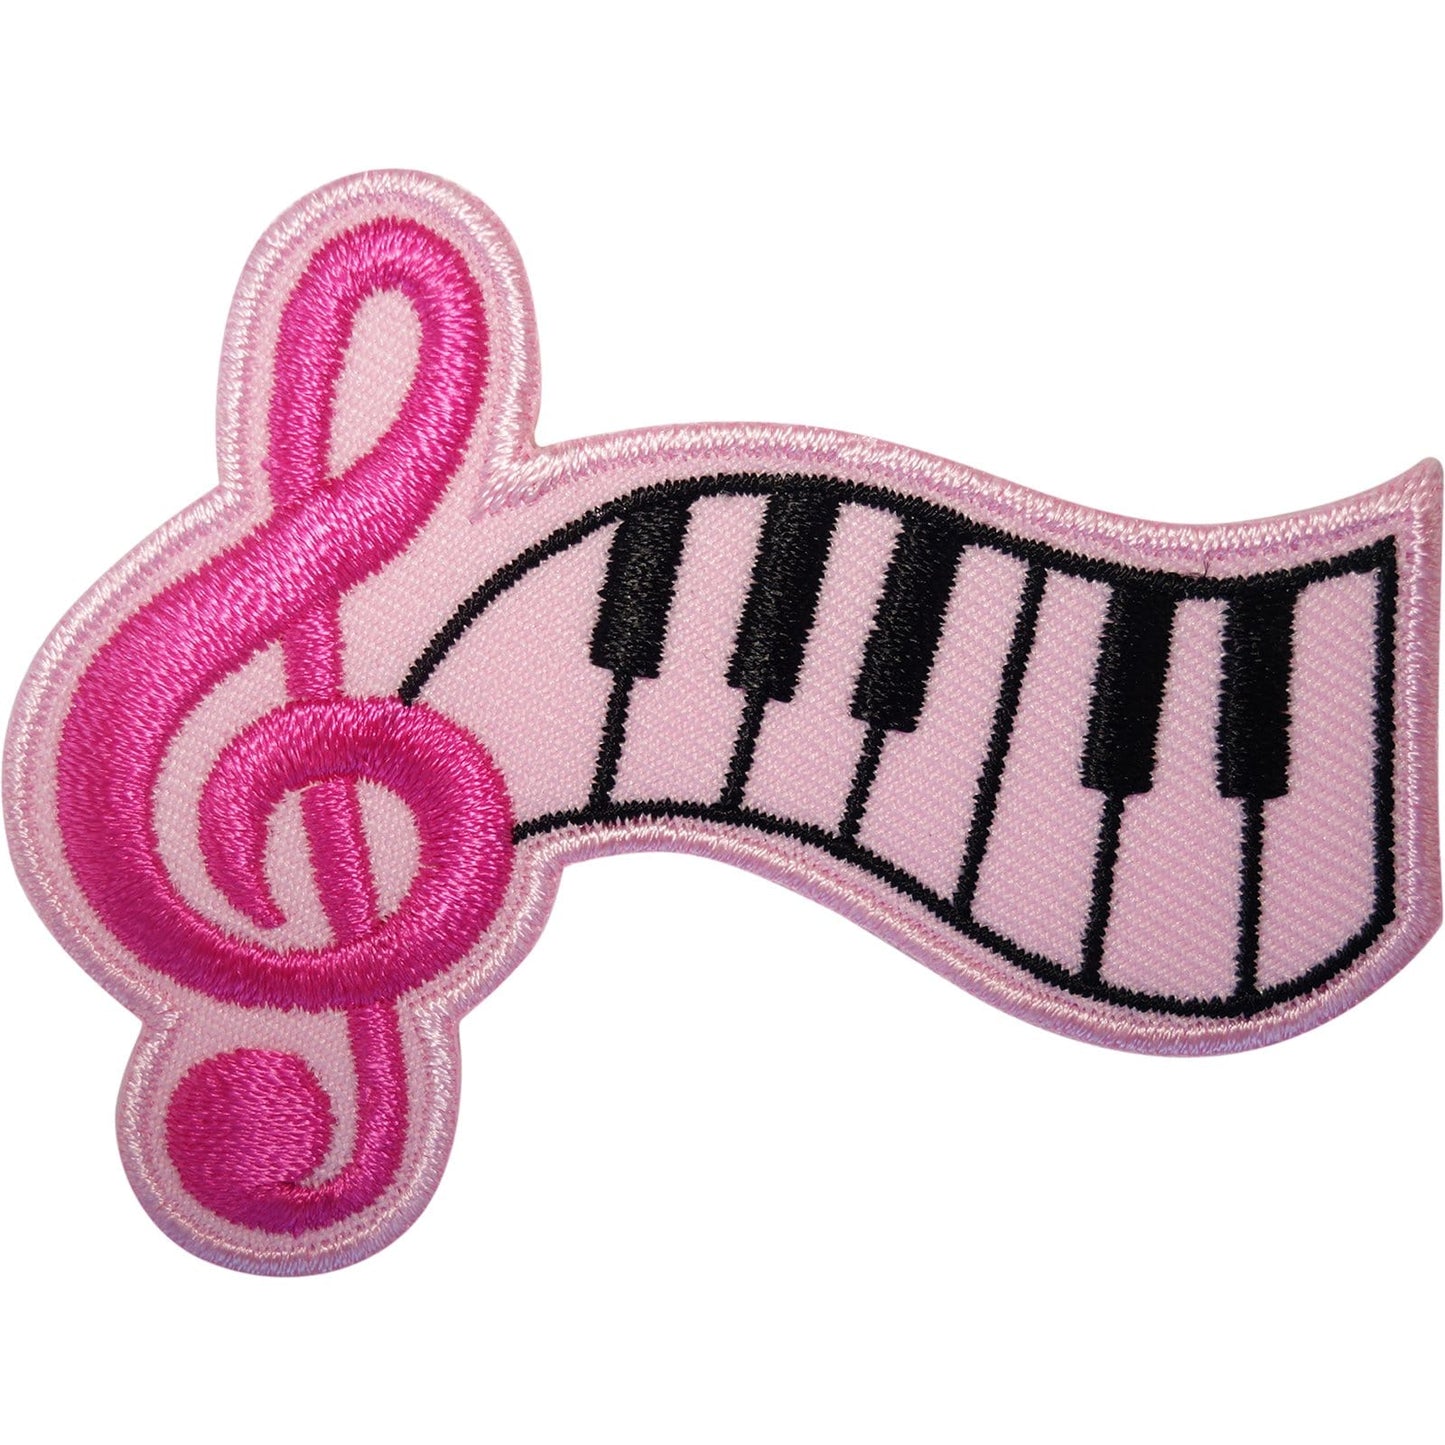 Pink Music Note Piano Keyboard Patch Iron Sew On Clothes Bag Embroidered Badge